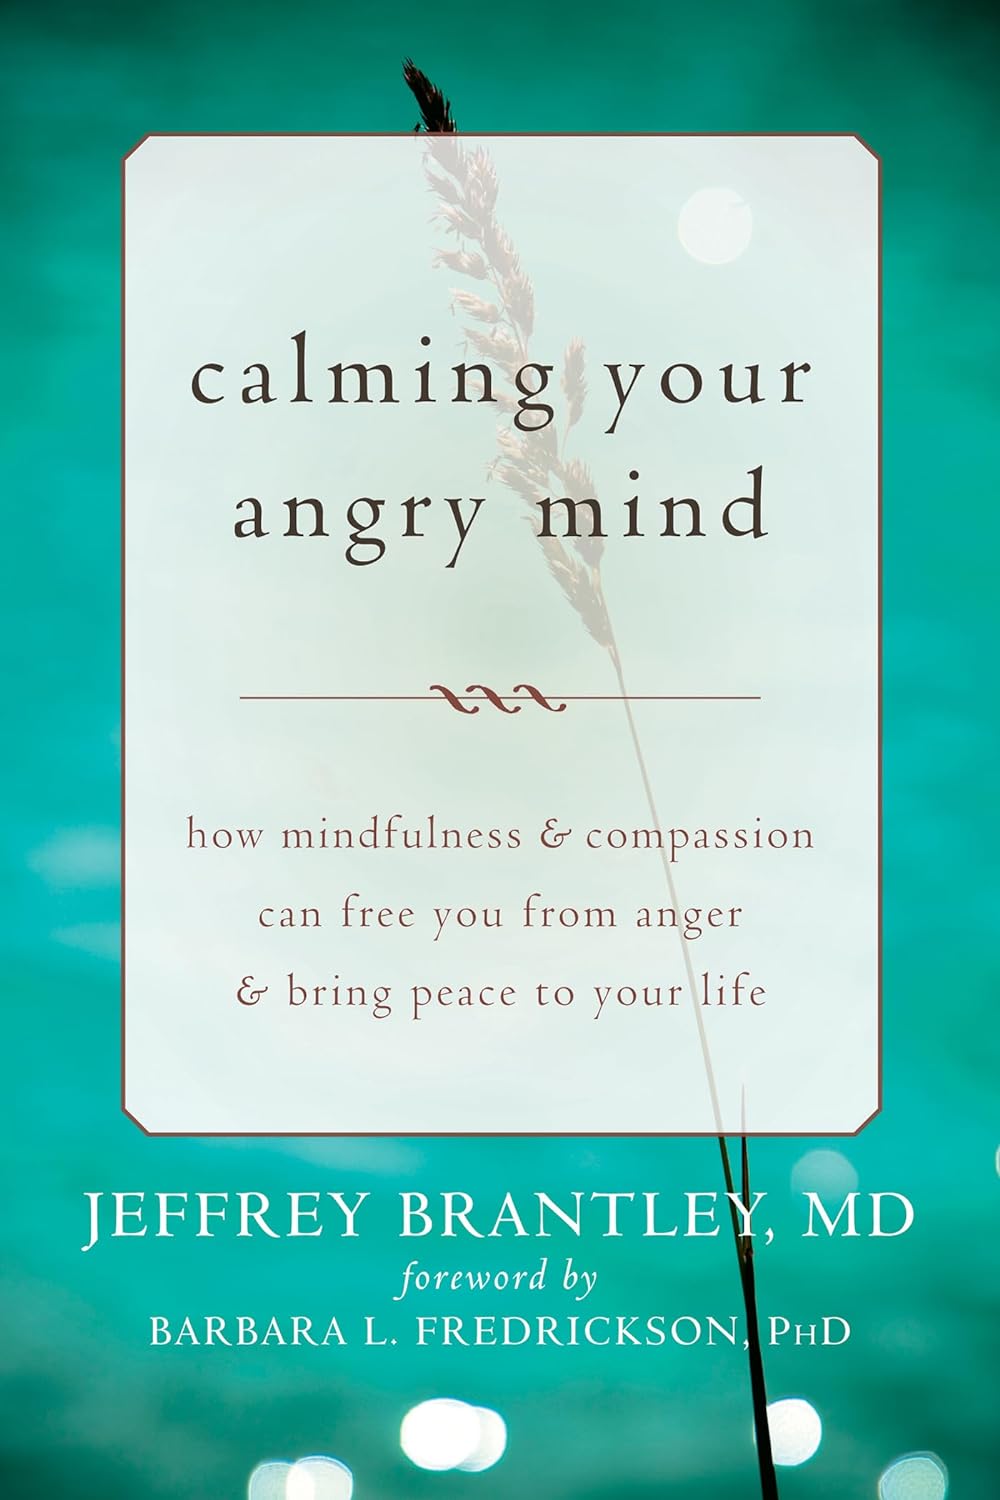 Calming Your Angry Mind: How Mindfulness And Compassion Can Free You From Anger And Bring Peace To Your Life [Jeffrey Brantley, MD]